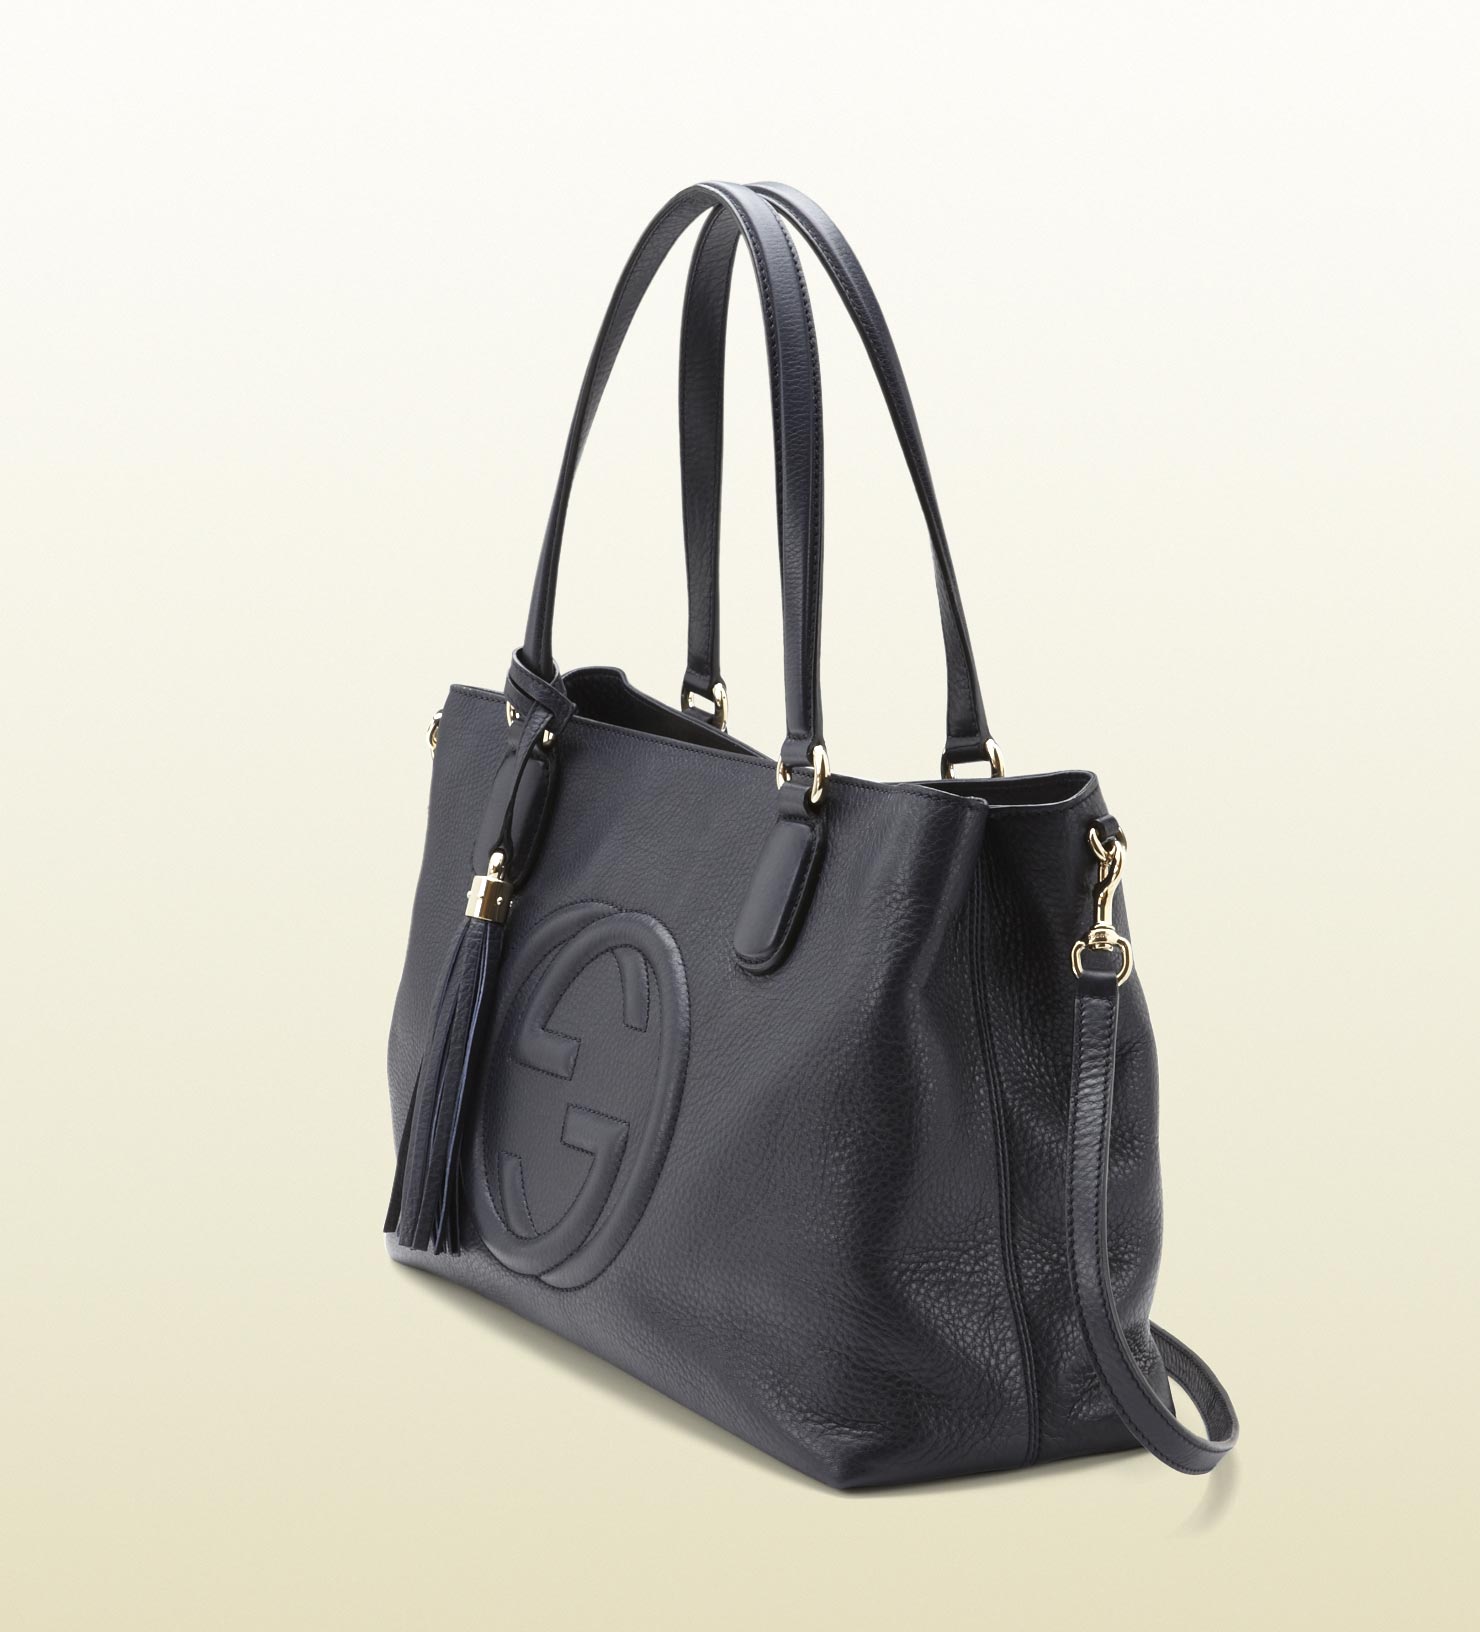 Lyst - Gucci Soho Blue Leather Working Tote in Black